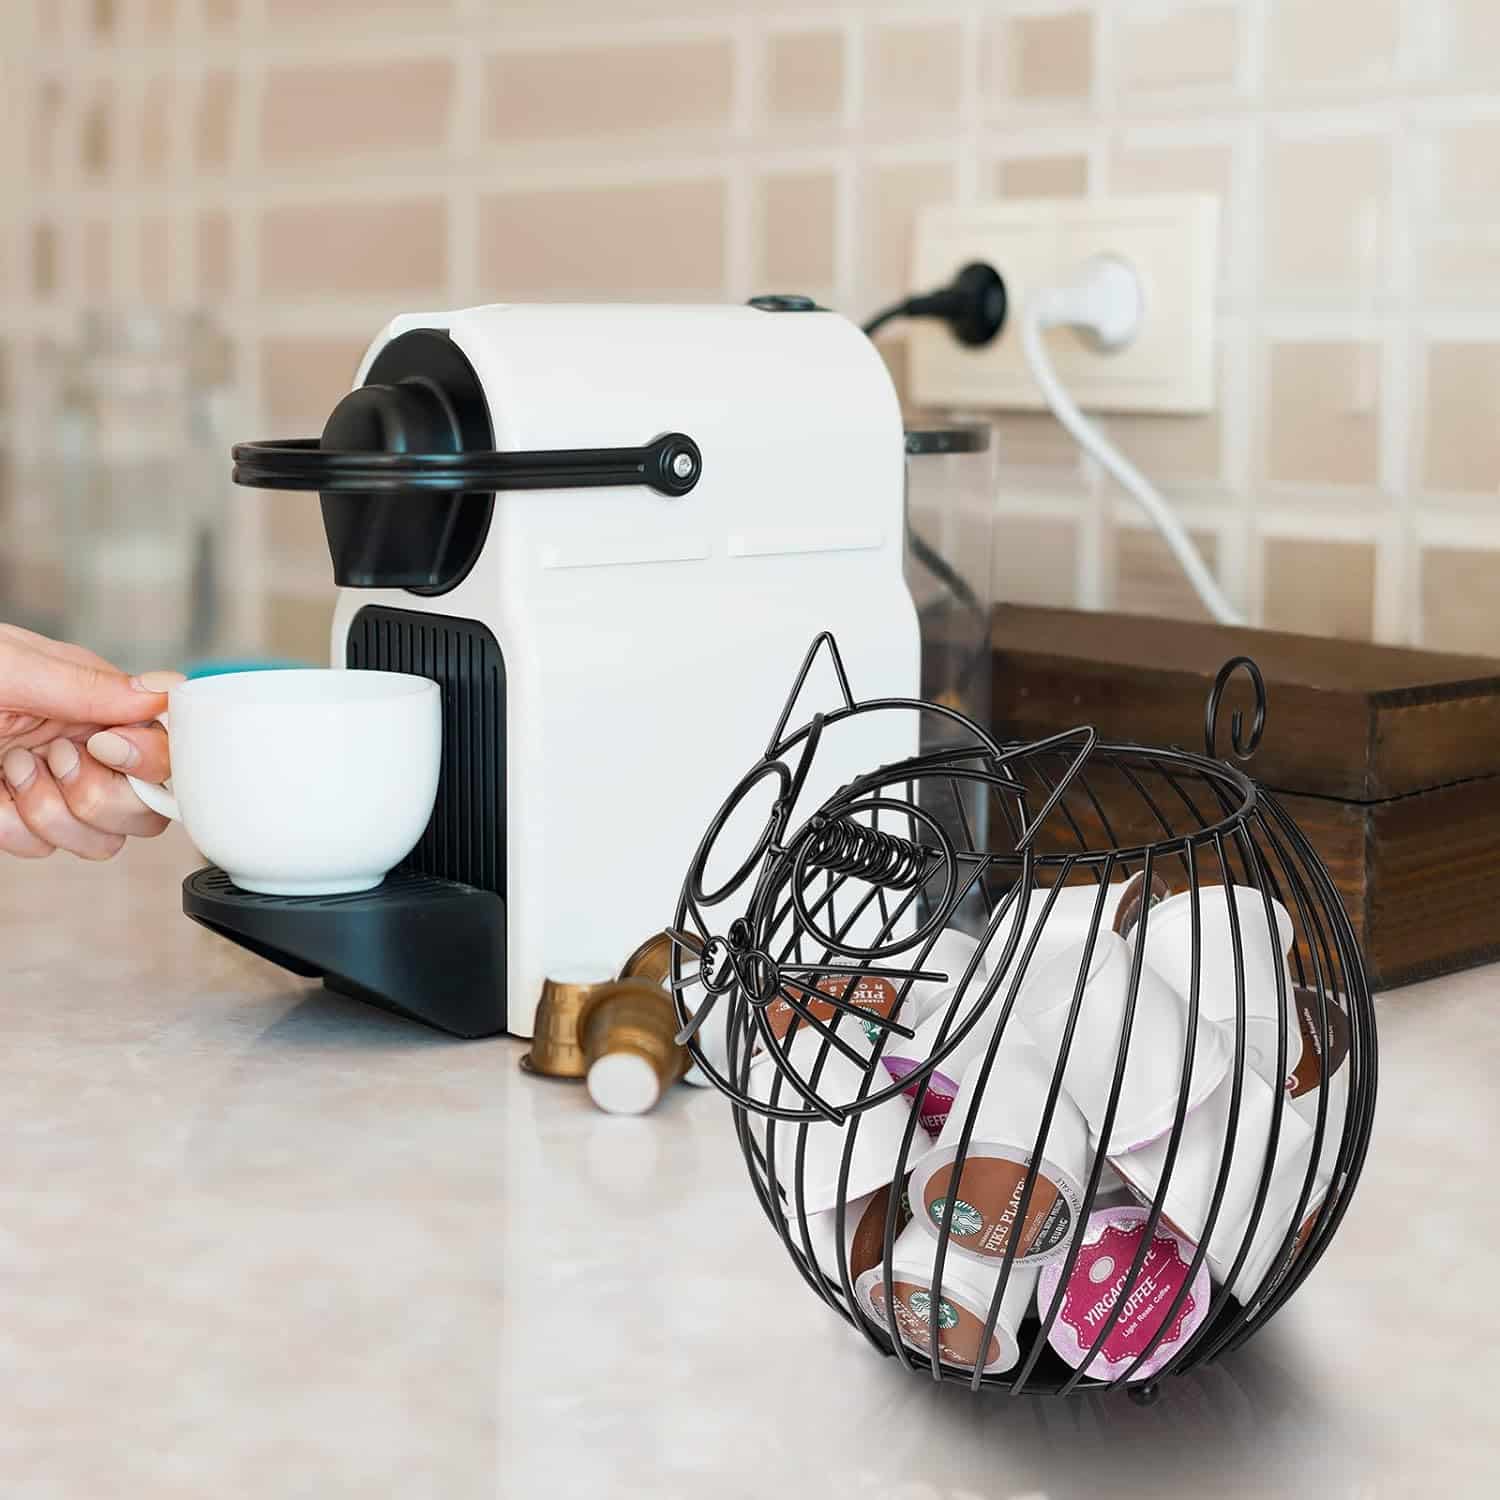 Puricon Coffee Pod Holder: A Cute and Functional Addition to Your Coffee Bar